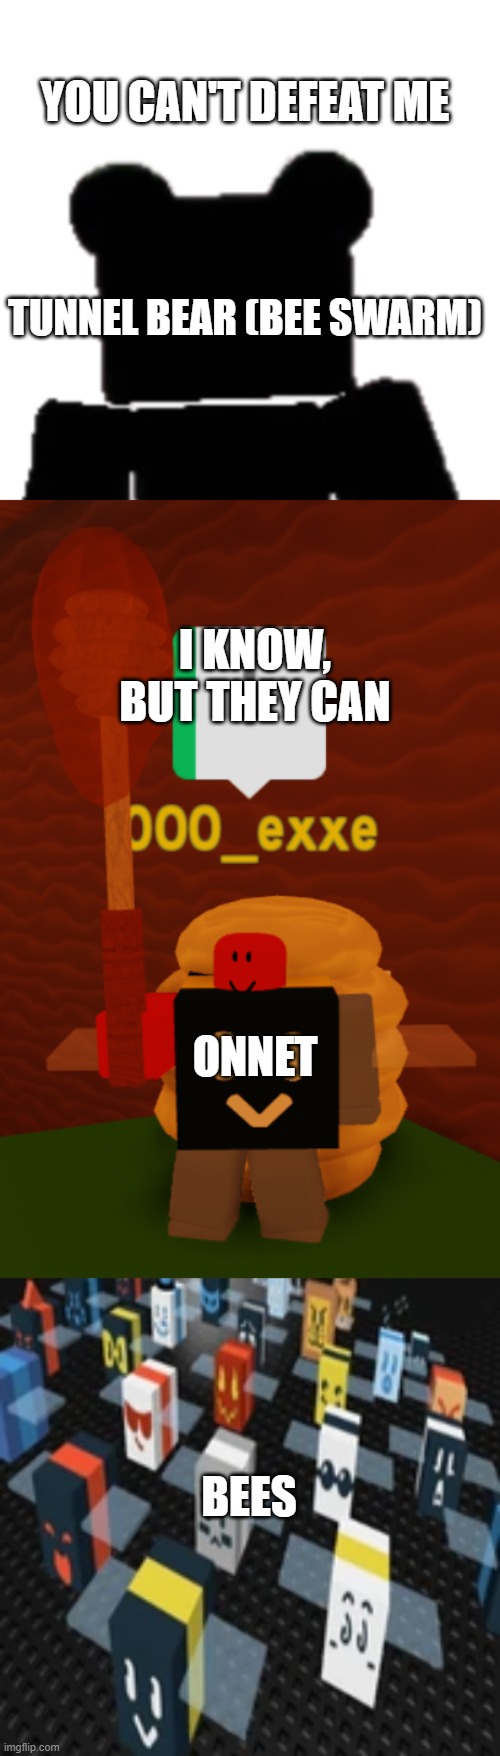 Ik but they can | YOU CAN'T DEFEAT ME; TUNNEL BEAR (BEE SWARM); I KNOW, BUT THEY CAN; ONNET; BEES | image tagged in roblox,bees,memes,funny | made w/ Imgflip meme maker